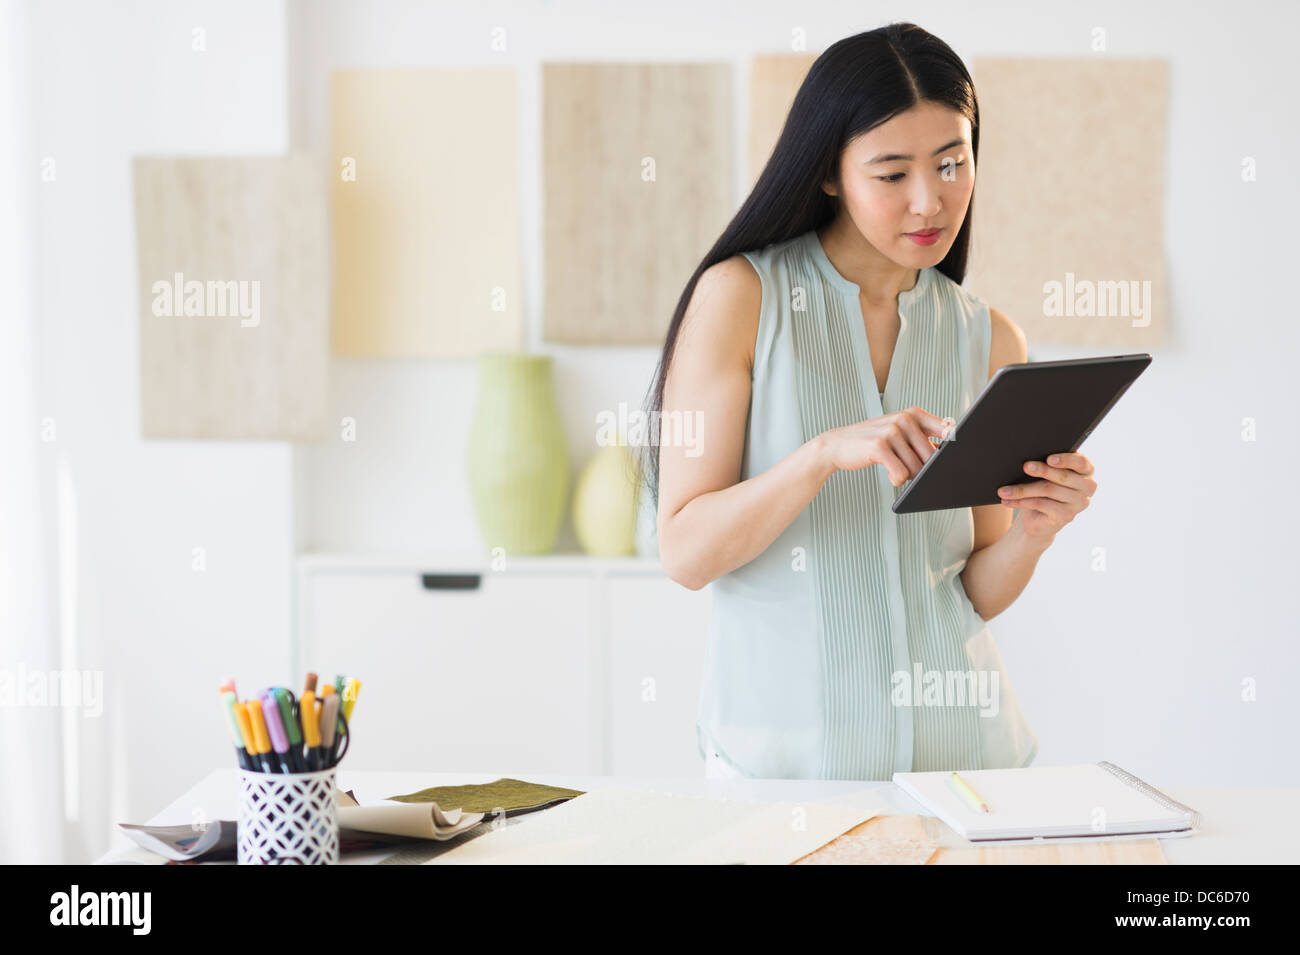 Business woman using tablet pc Stock Photo